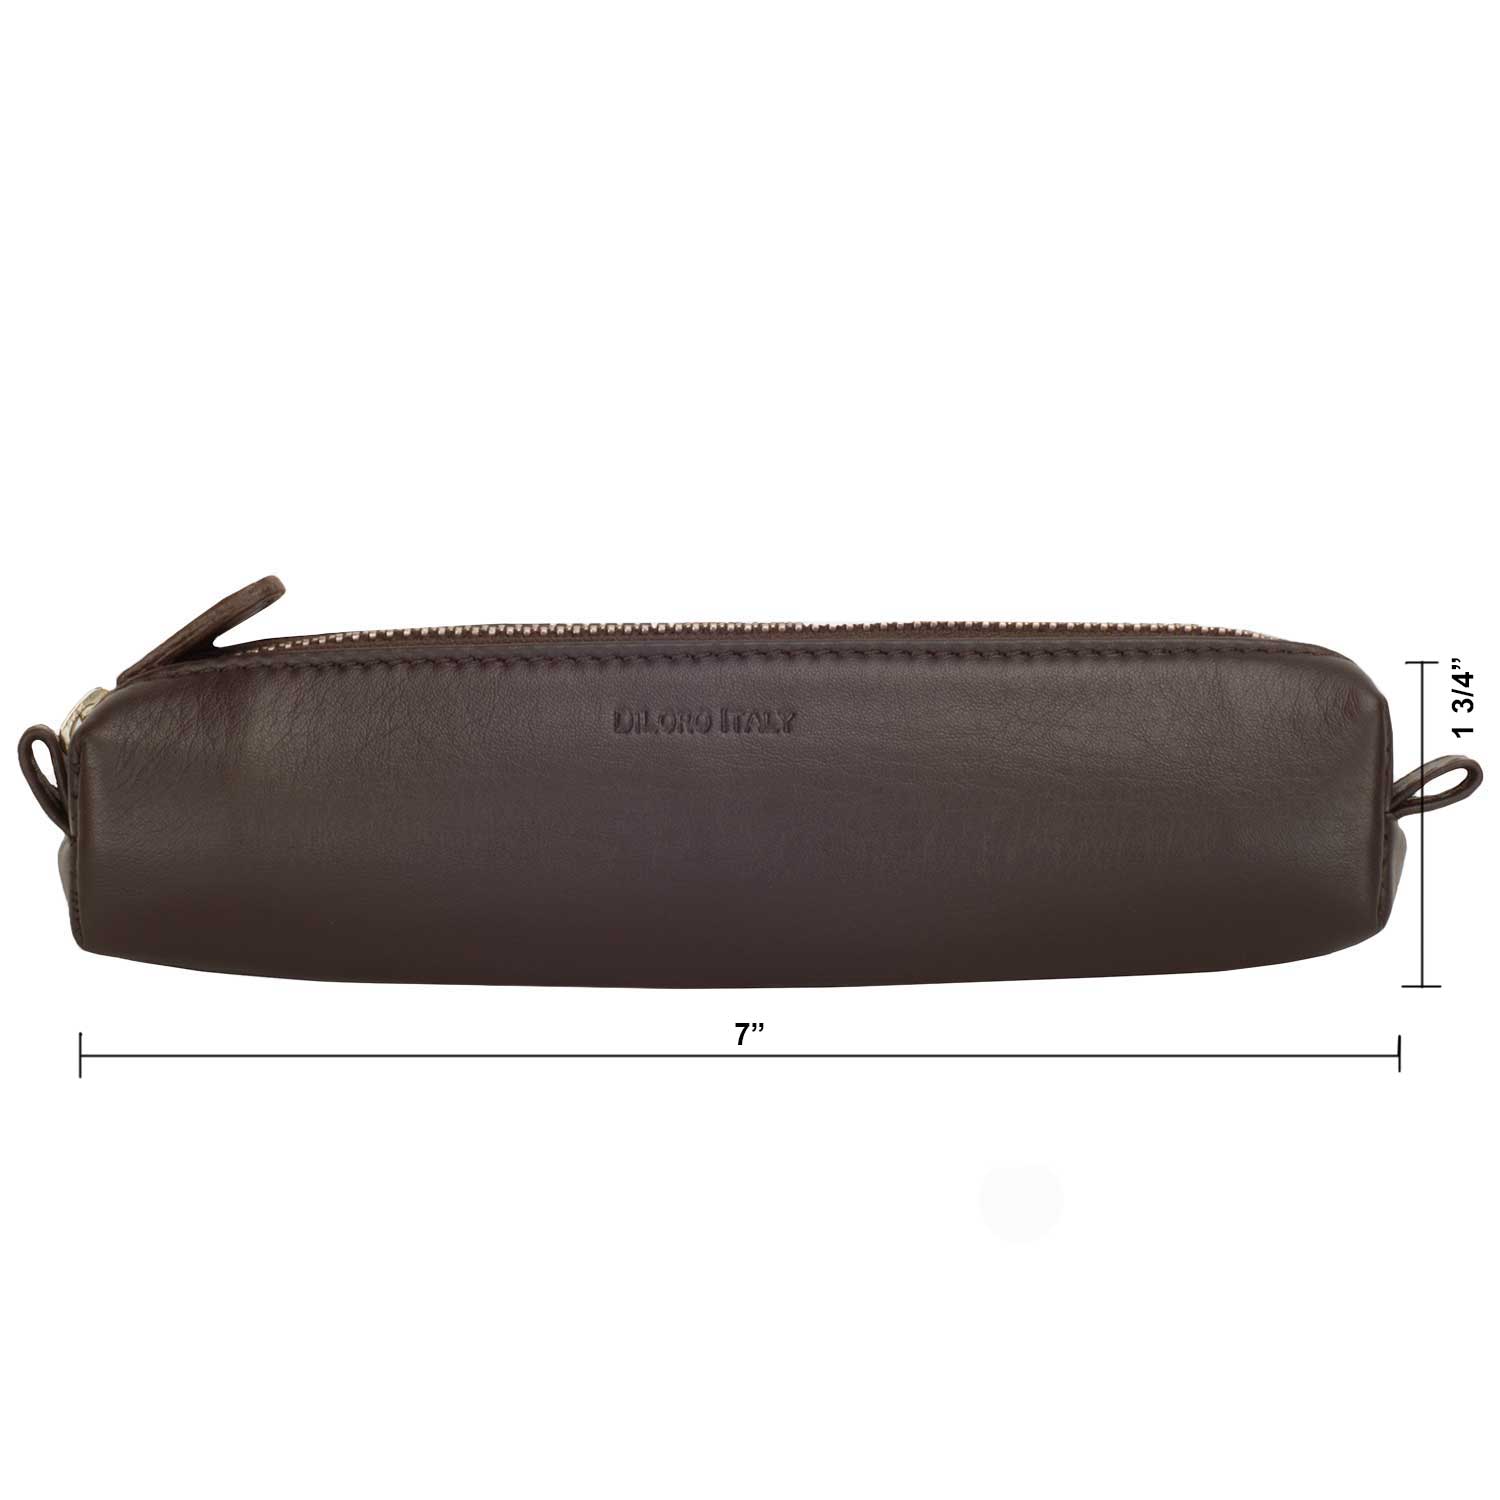 Multi-Purpose Zippered Leather Pen Pencil Case Pouch in Various Colors - Dark Brown (dimensions)